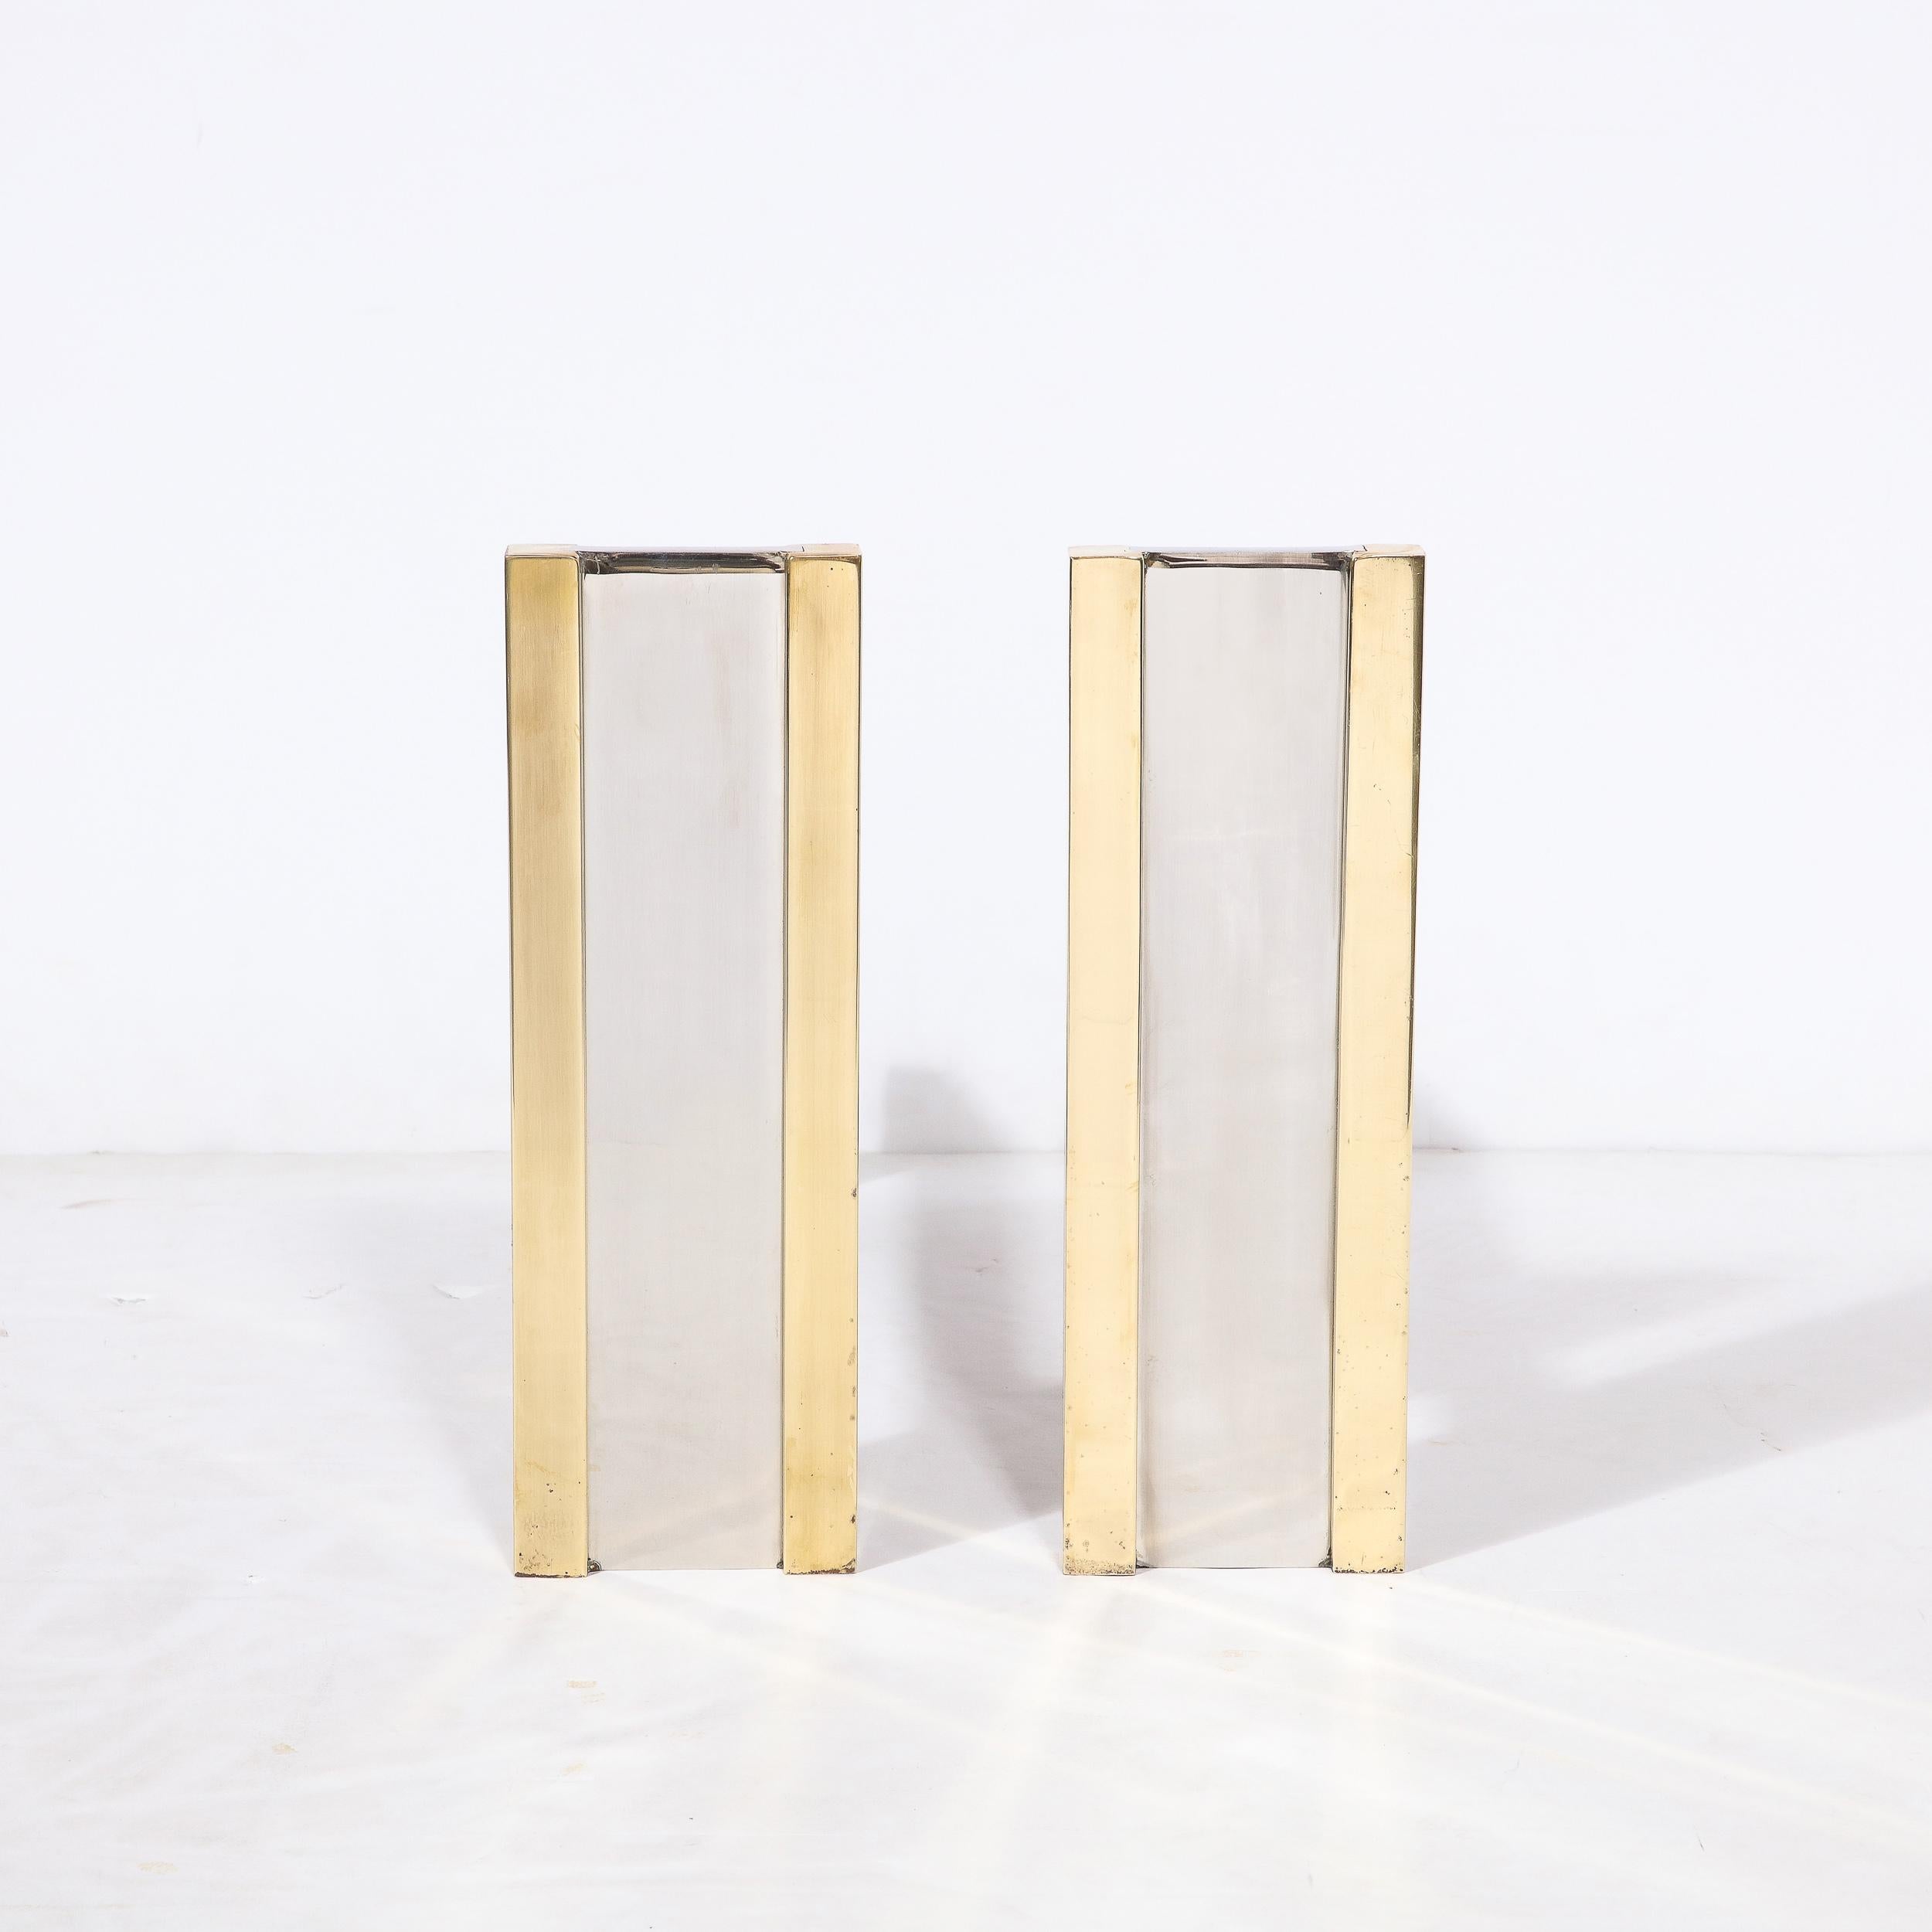 A striking pair of Mid-Century Modernist andirons by the American designer, Danny Alessandro. In the 1980s Alessandro began making furniture and lighting in his woodshop in Santa Barbara, California where he was known for his Mid-Century Modernist